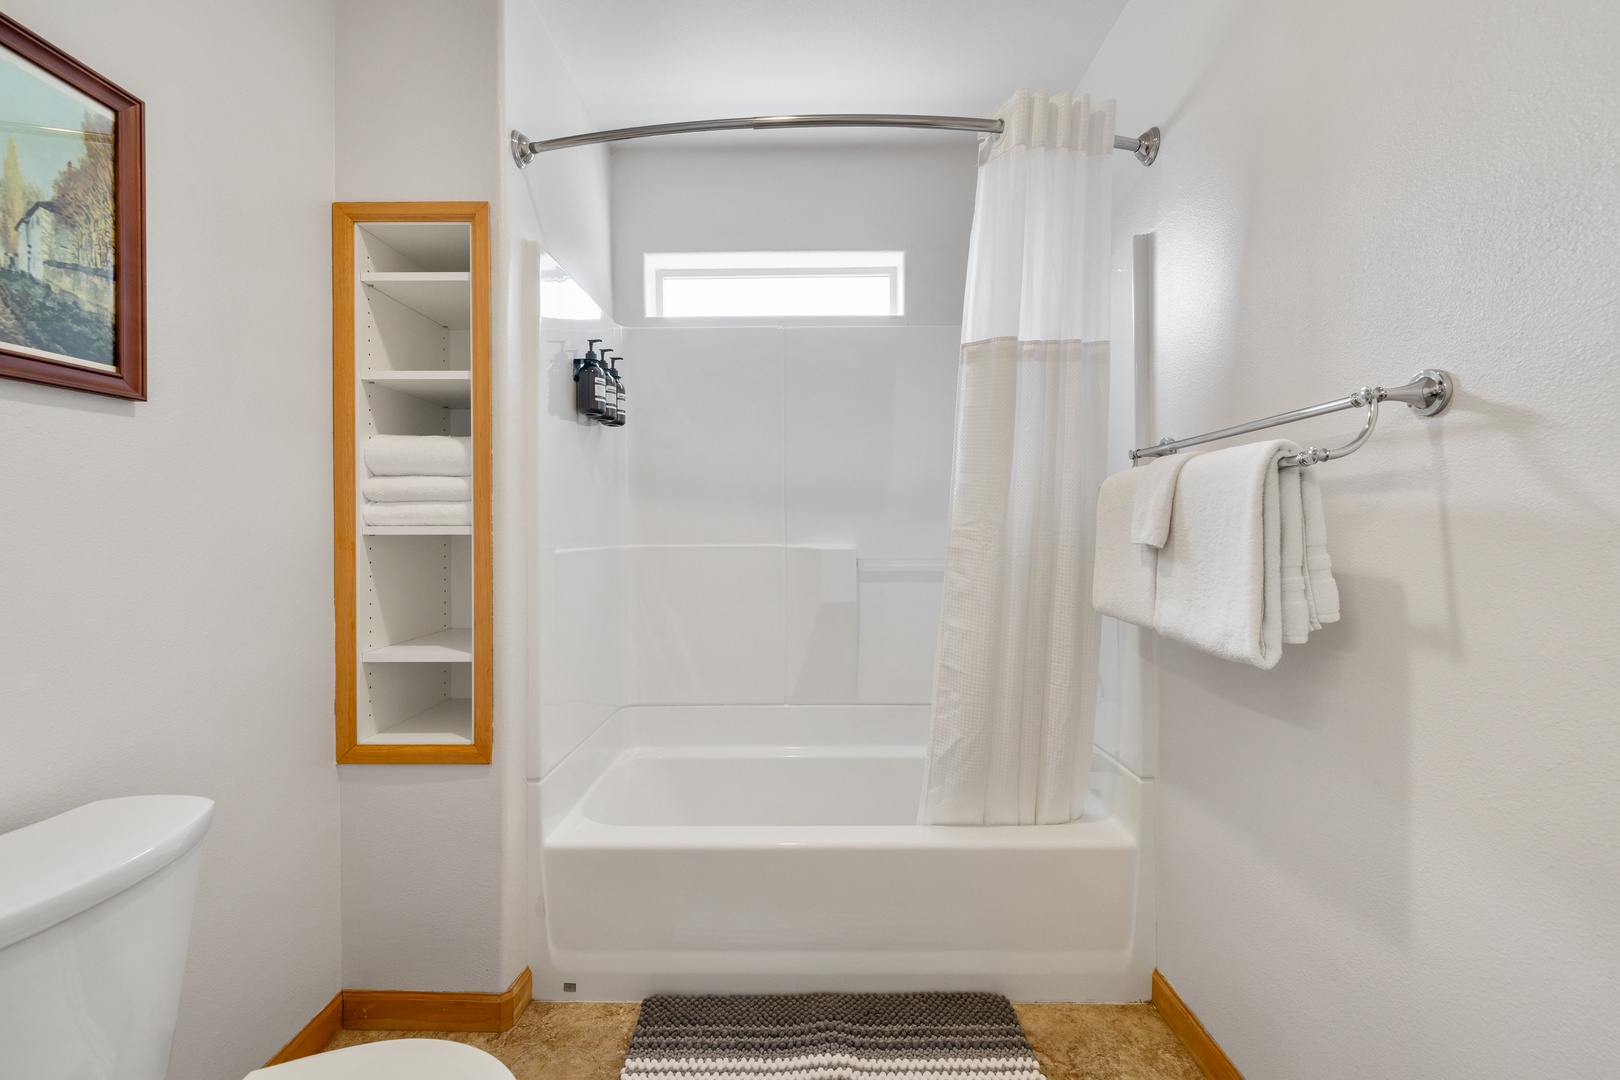 The king en suite includes an oversized single vanity & shower/tub combo